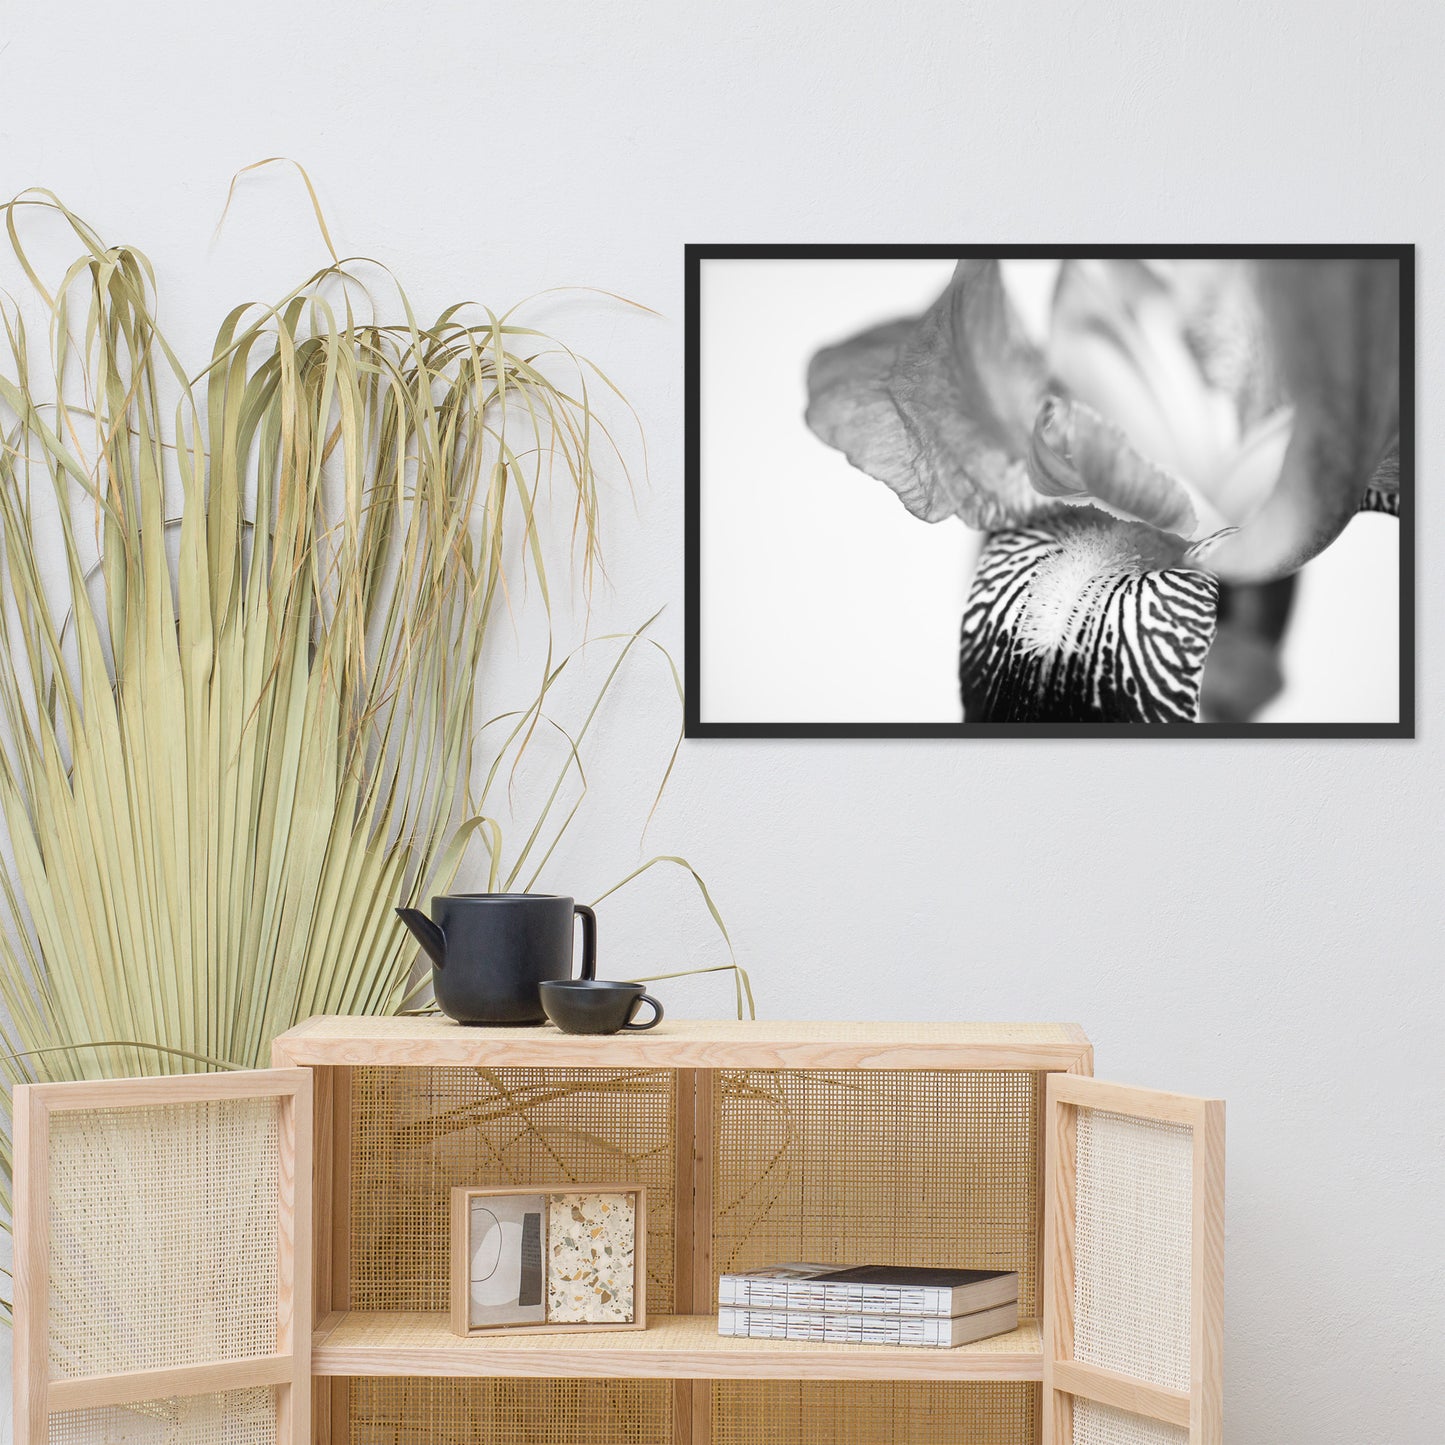 Bold Iris on White Black and White Floral Nature Photo Framed Wall Art Print